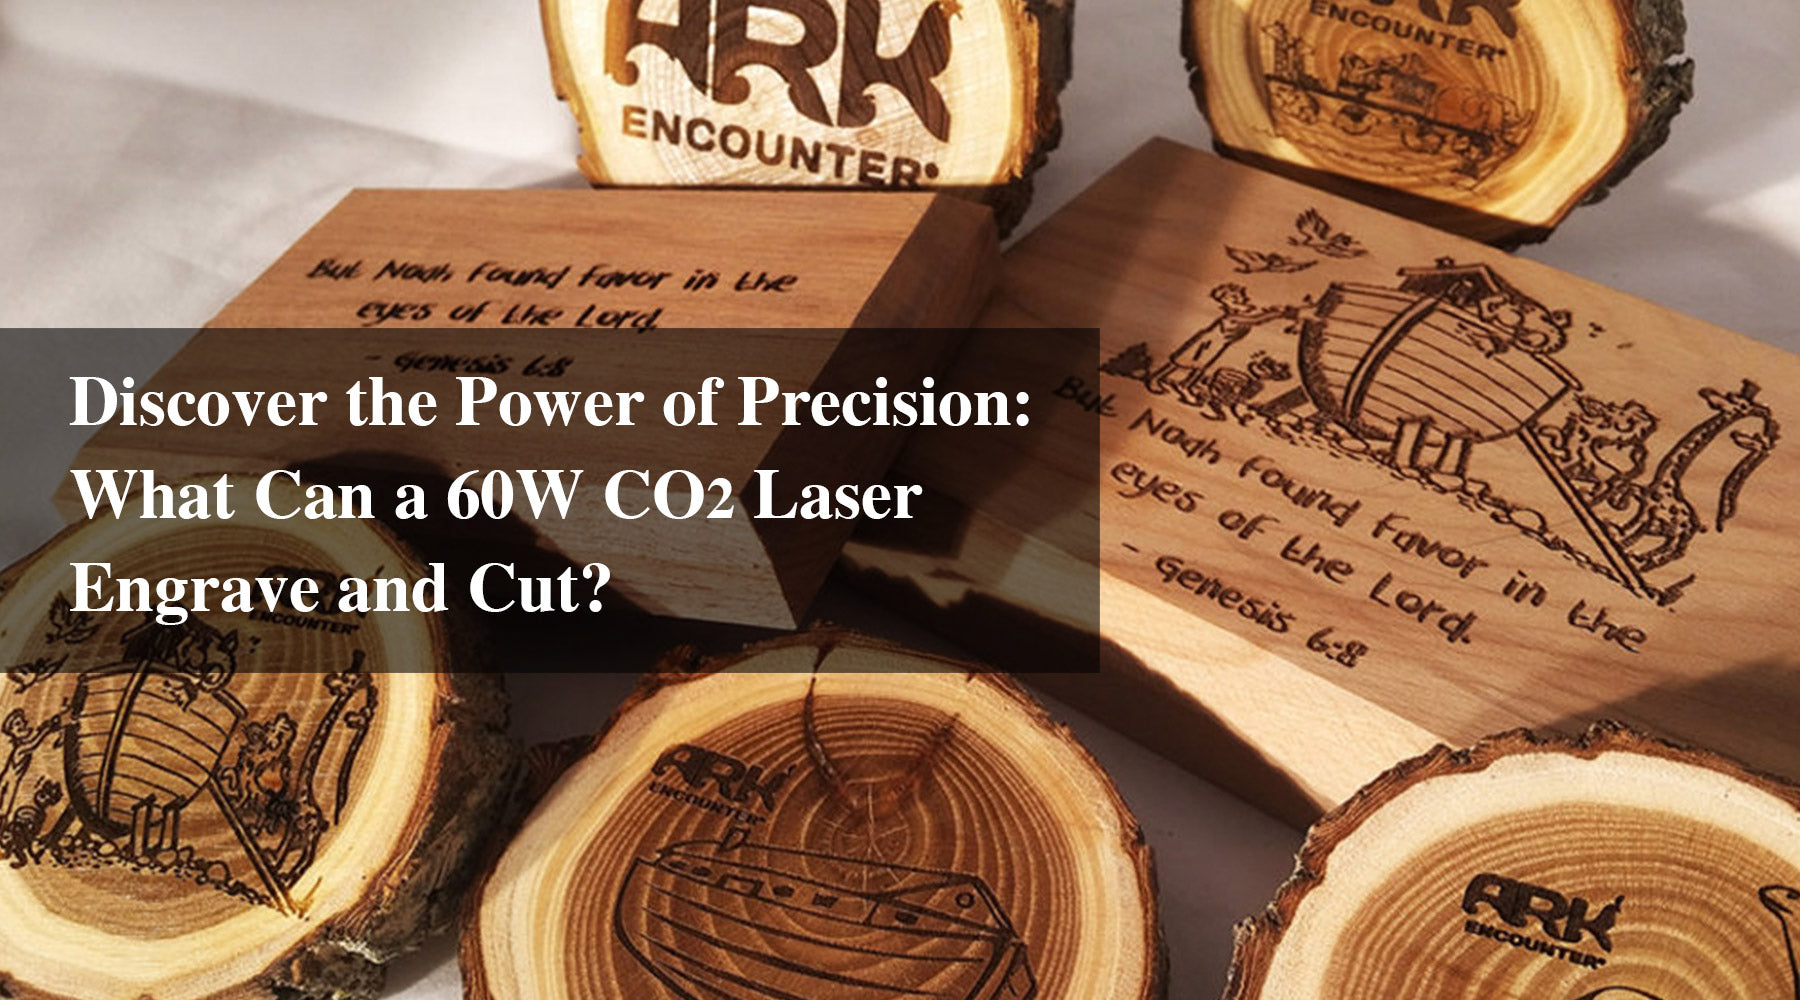 Discover the Power of Precision: What Can a 60W CO2 Laser Engrave and Cut?